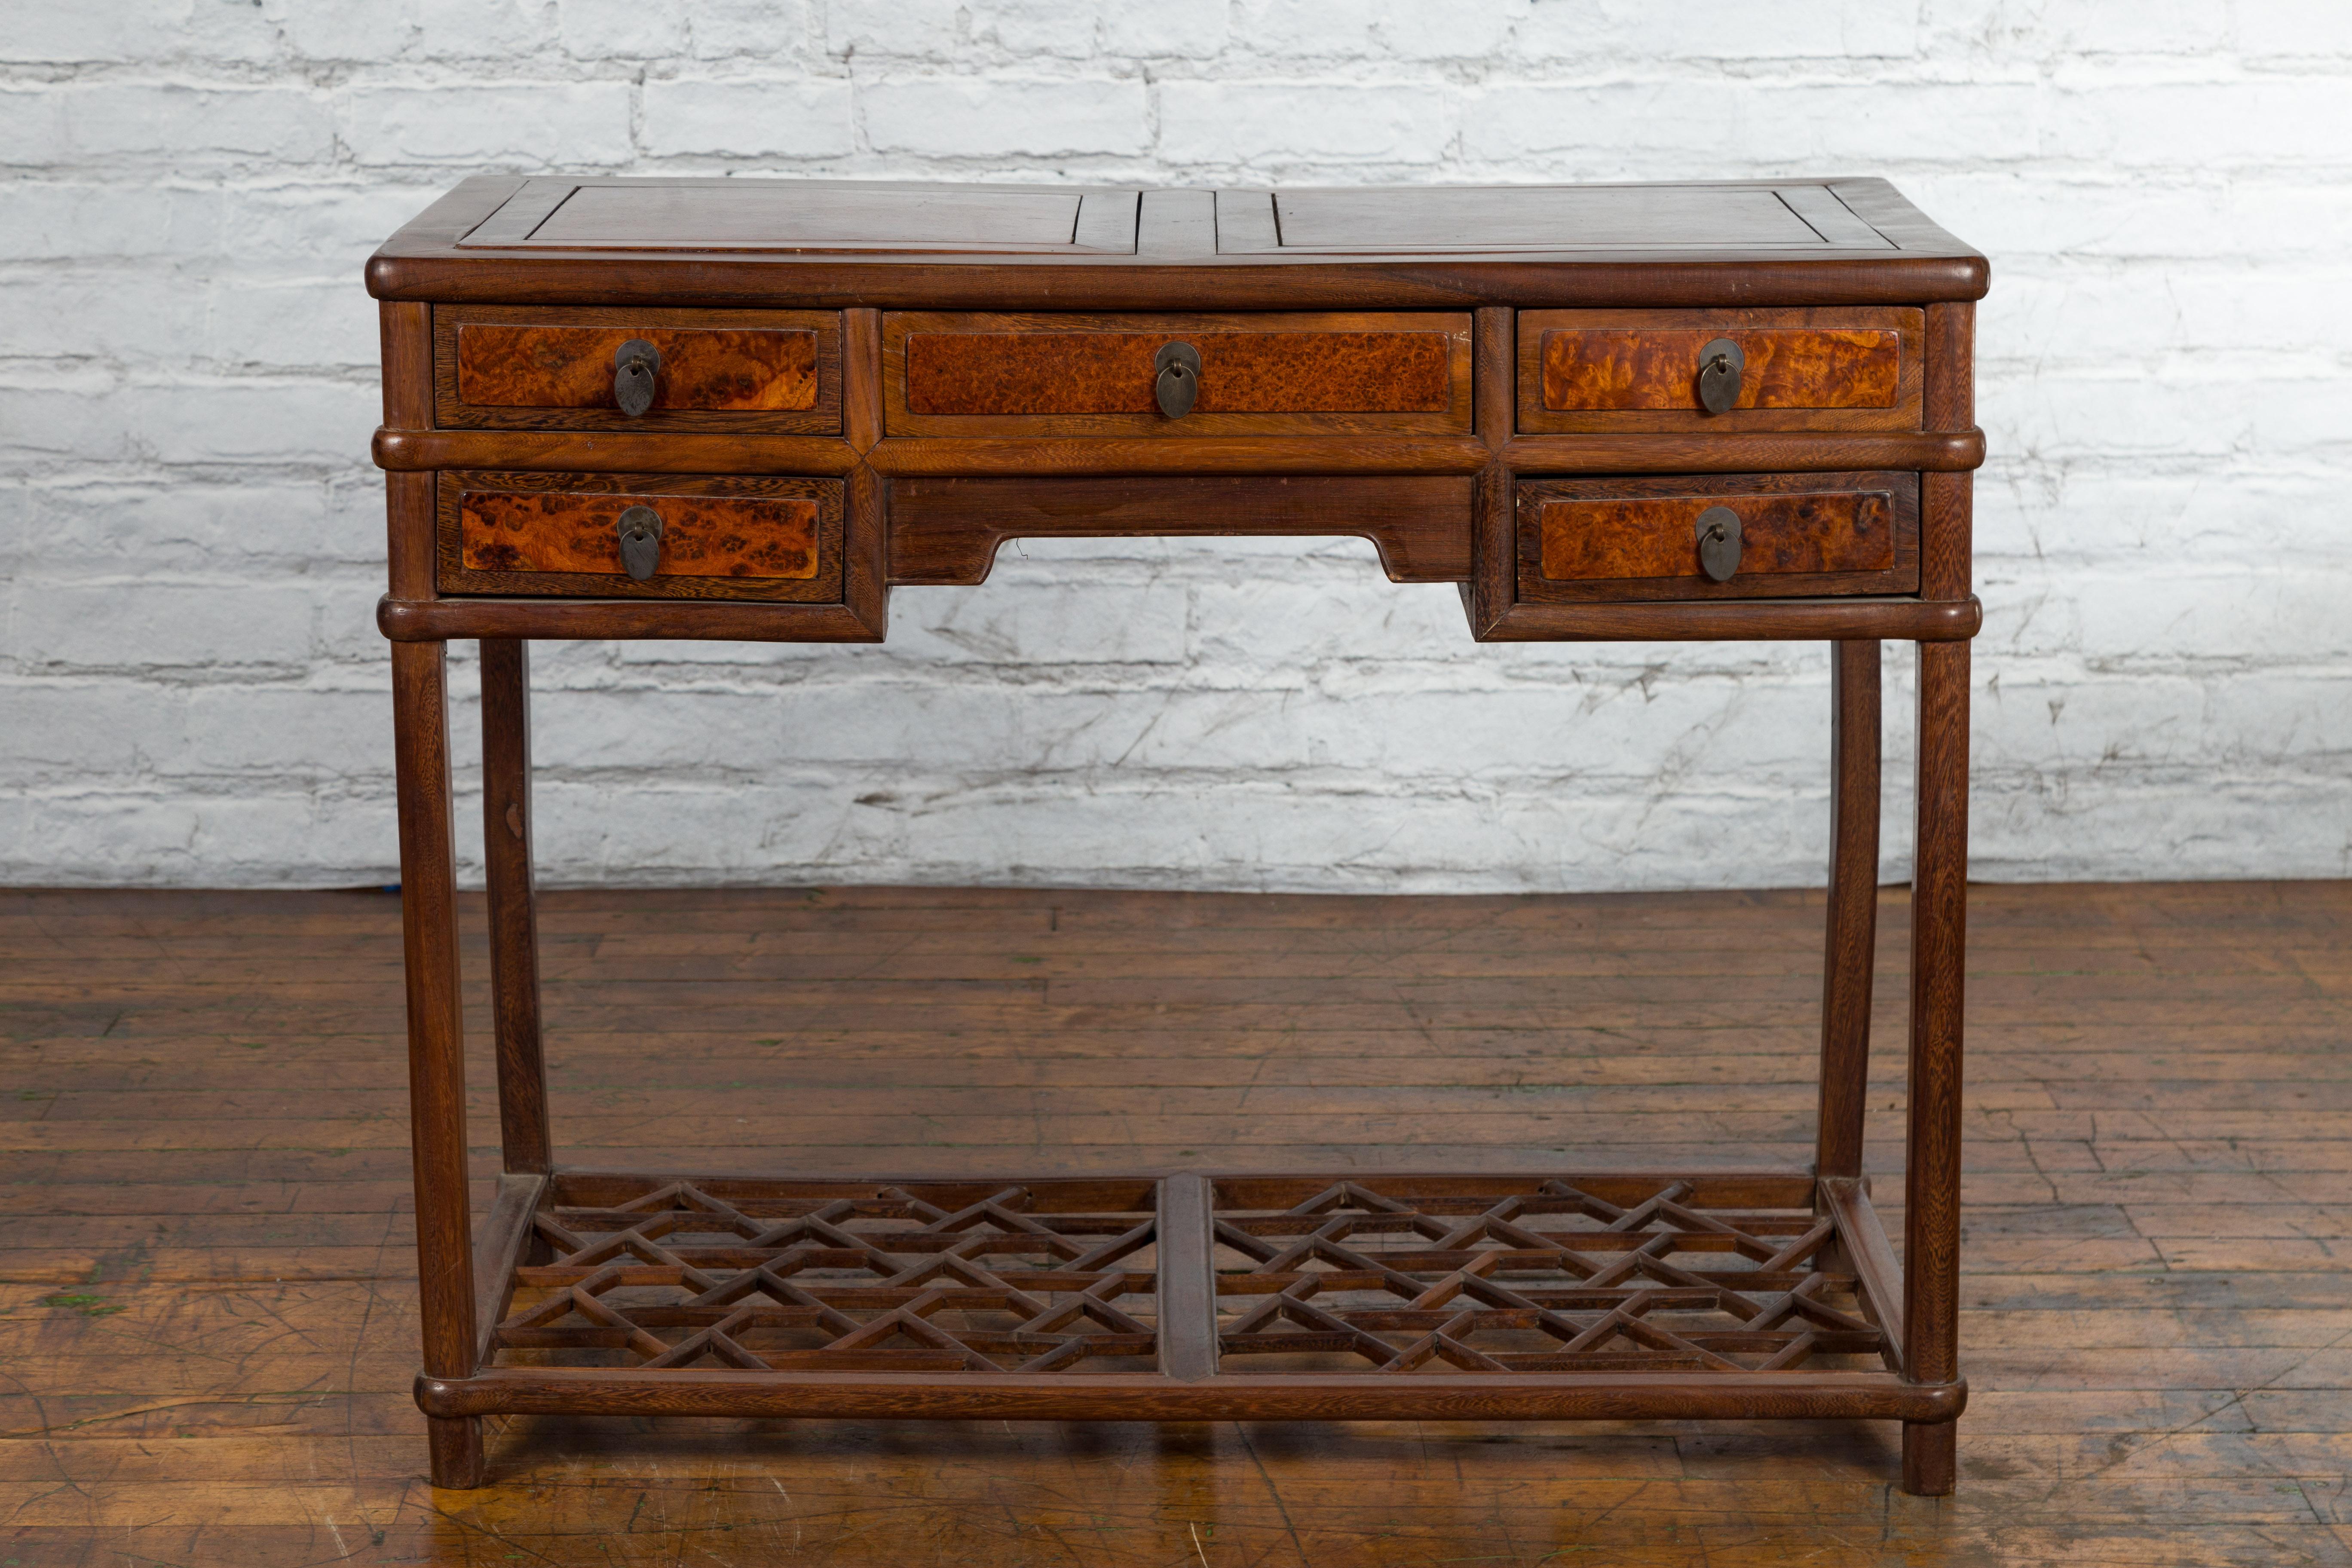 A Chinese Qing Dynasty period wooden desk from the 19th century, with burlwood inset top, five drawers and cracked ice base. Created in China during the Qing Dynasty, this wooden desk features a burlwood two-panel inset top sitting above five burl